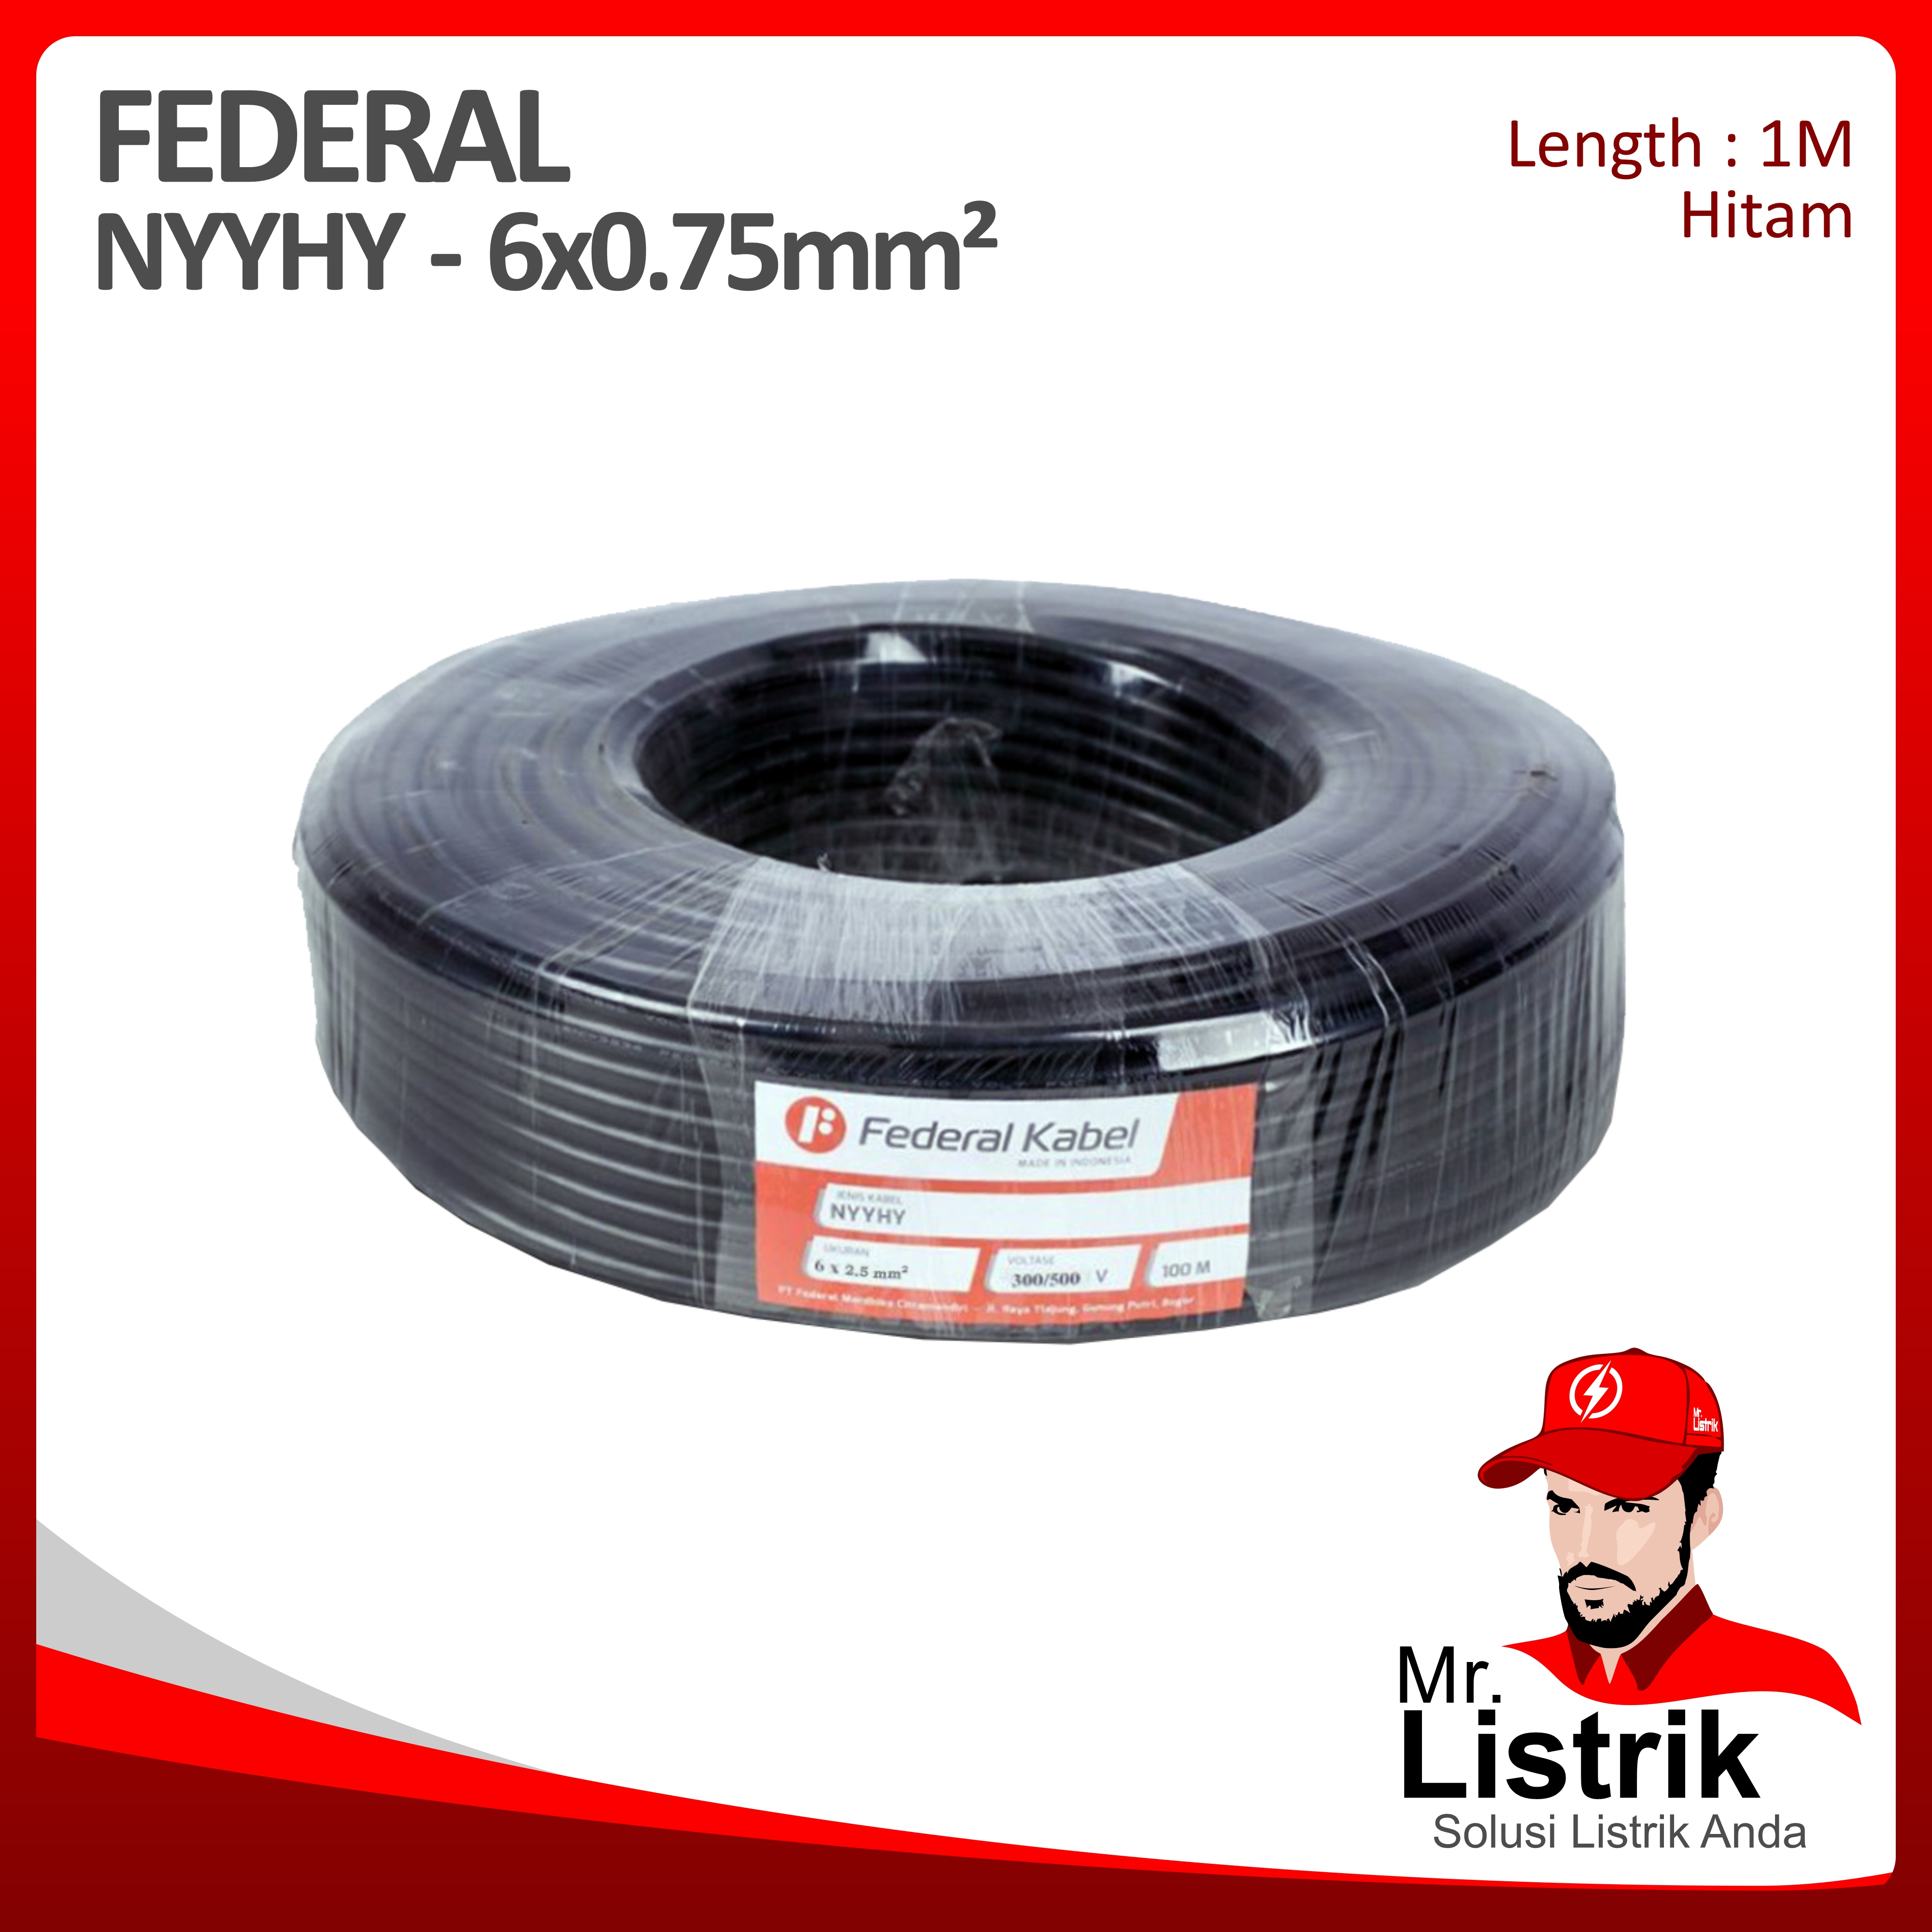 Kabel NYYHY Federal 6x0.75 mm² @1 Mtr